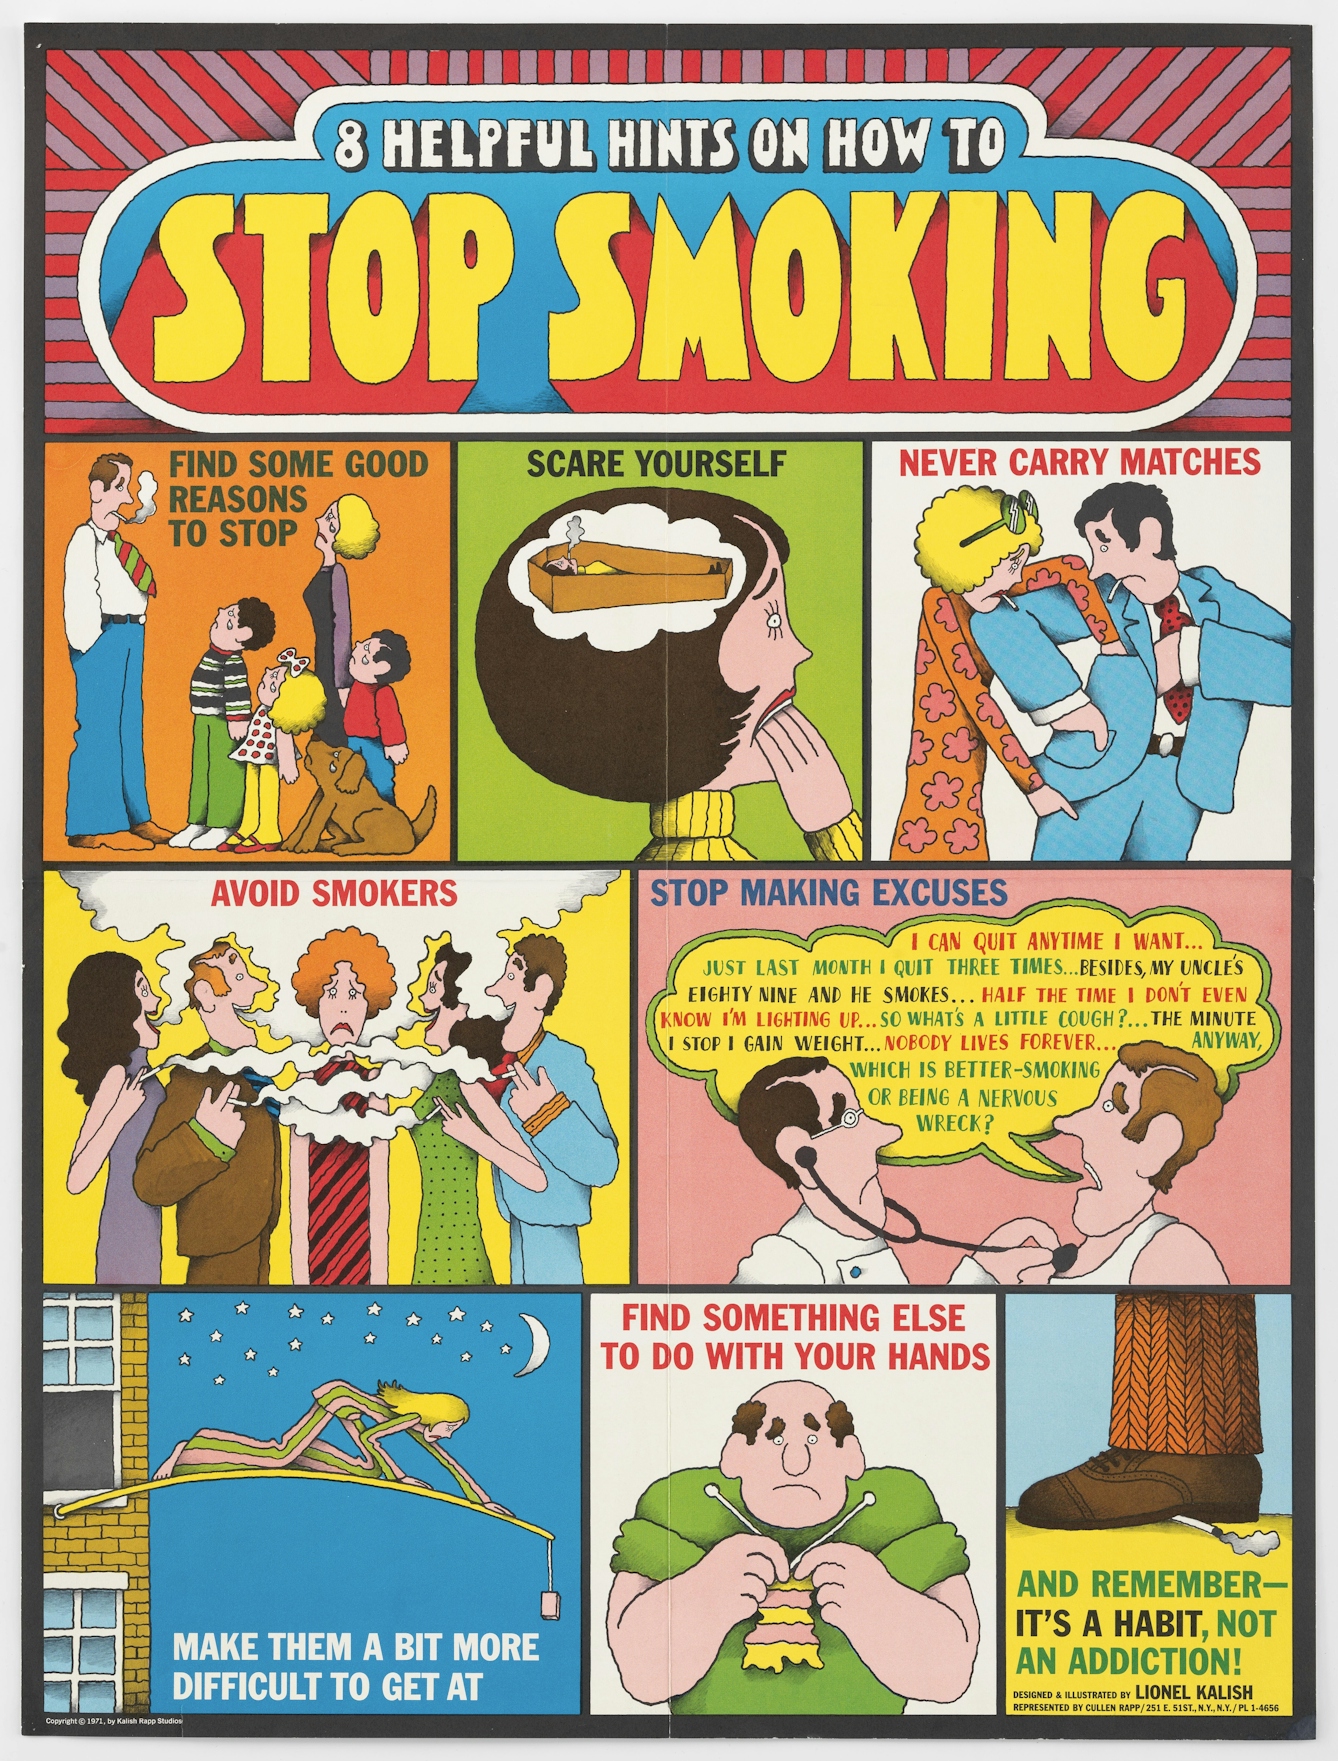 Brightly coloured, illustrated poster in a 1970s style detailing "8 helpful hints on how to stop smoking" and featuring a series of eight cartoon images and pieces of advice. The eight tips are: Find some good reasons to stop; Scare yourself; Never carry matches; Avoid smokers; Stop making excuses; Make them a bit more difficult to get at; Find something else to do with your hands; And remember it's a habit, not an addiction.